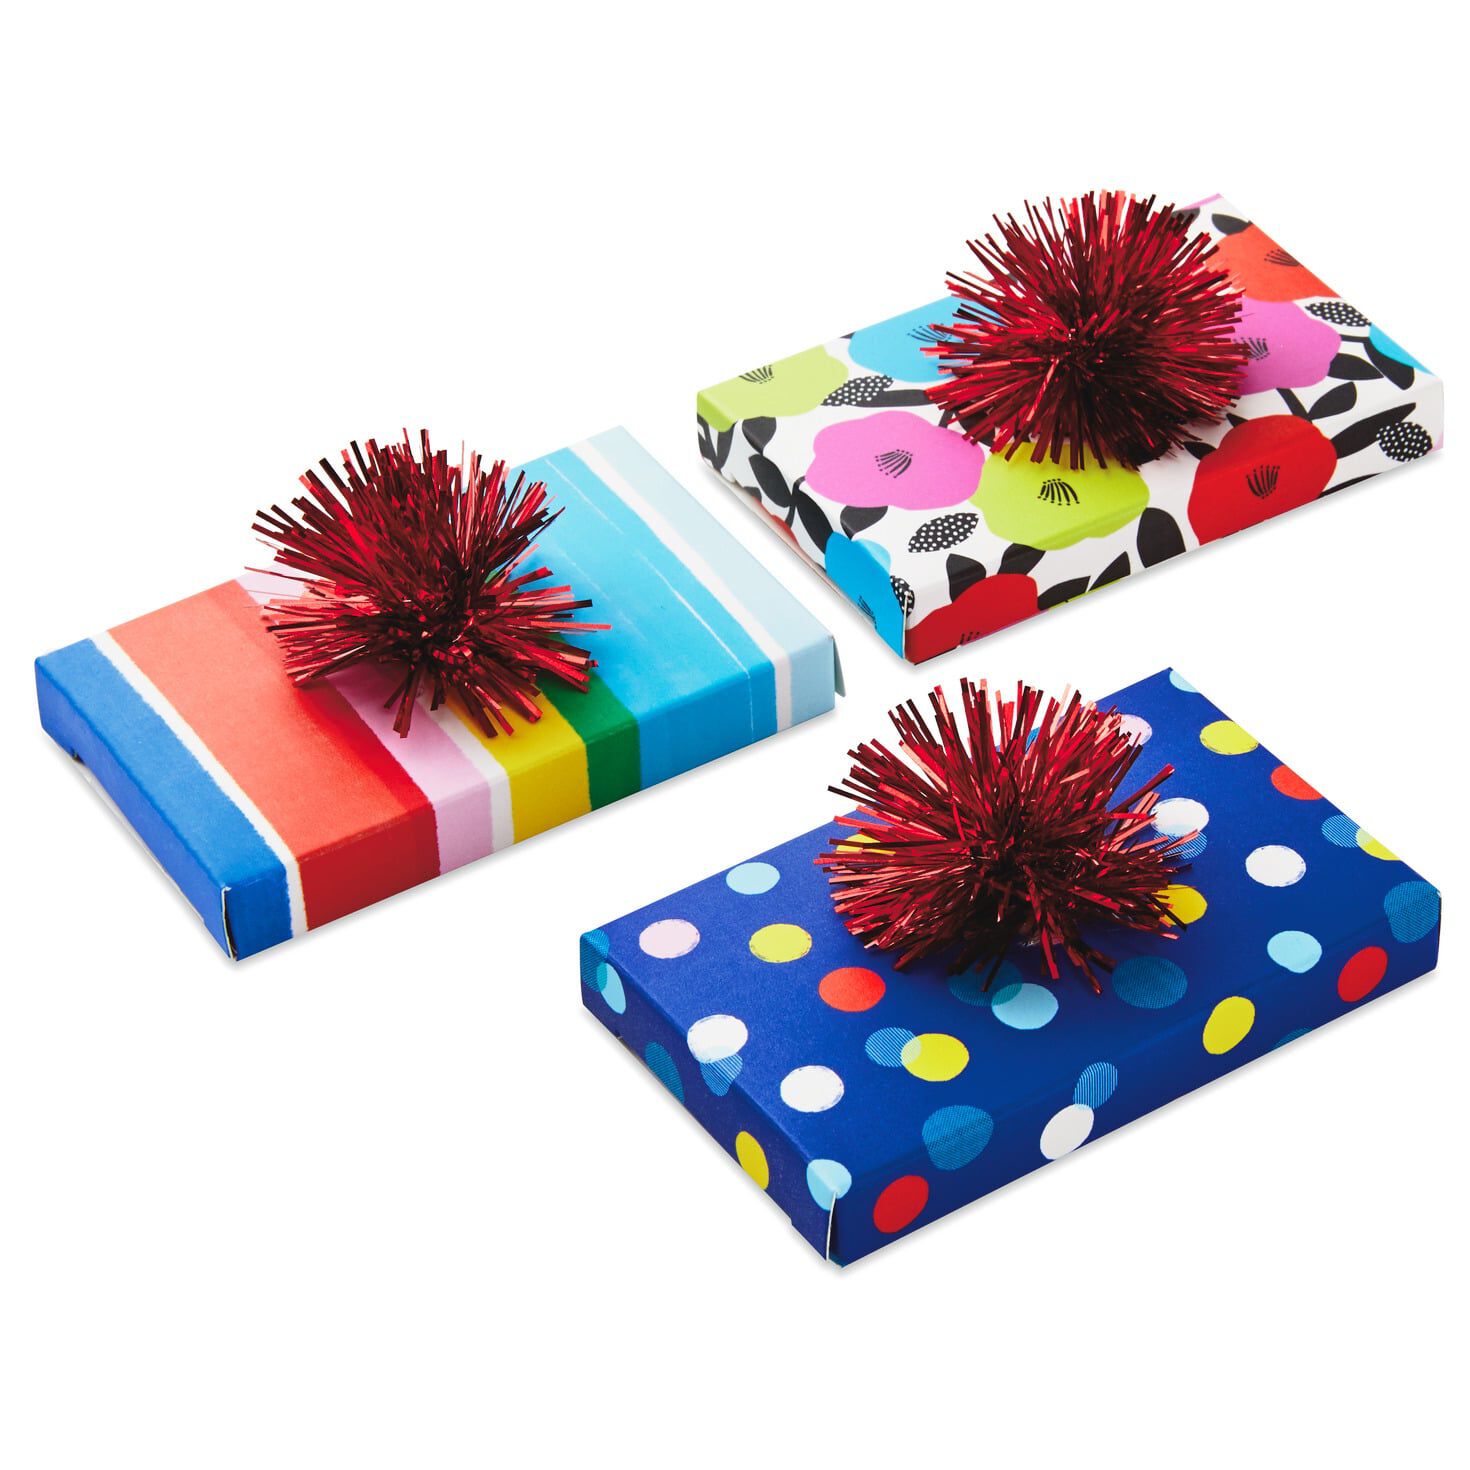 3.7 Assorted Gift Card Holder Boxes With Bows 3-Pack - Gift Card Holders -  Hallmark